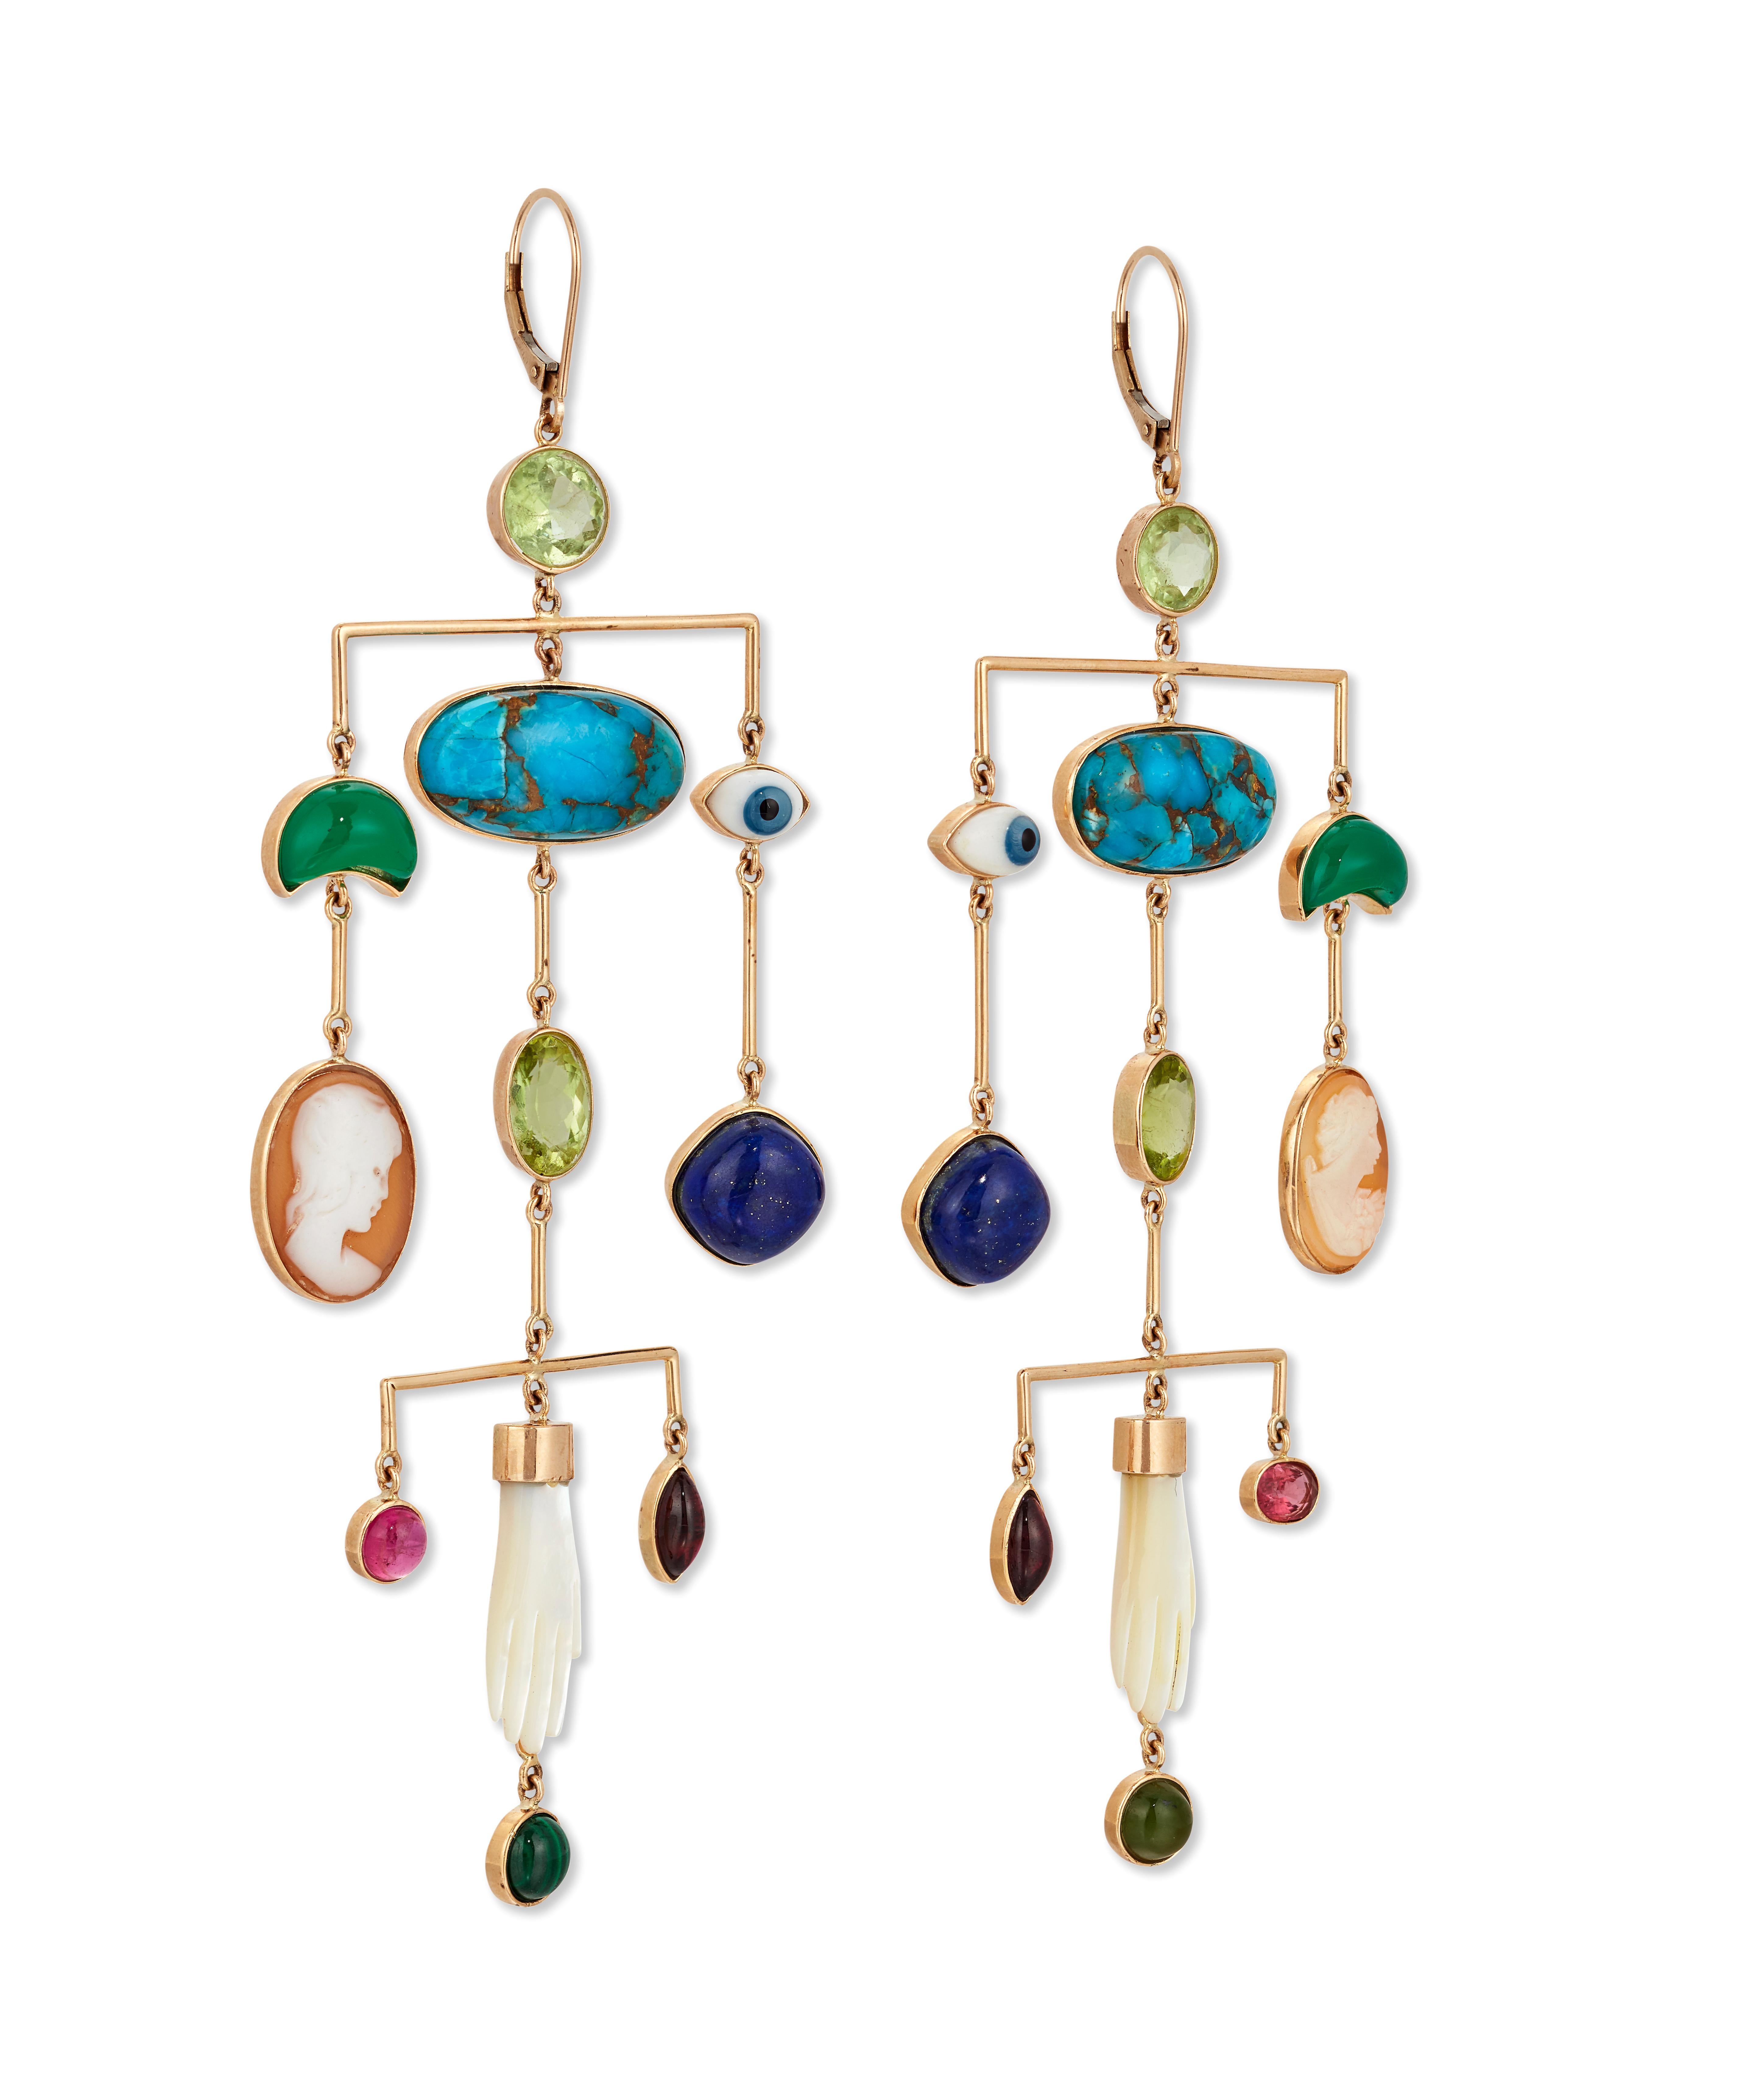 Each articulated Pendant suspending a series of antique charms and faceted gems, including turquoise, Peridot, Chrysoprase, Lapis, Garnet and carved shell hands.

Hook fittings set in 9ct Yellow gold.